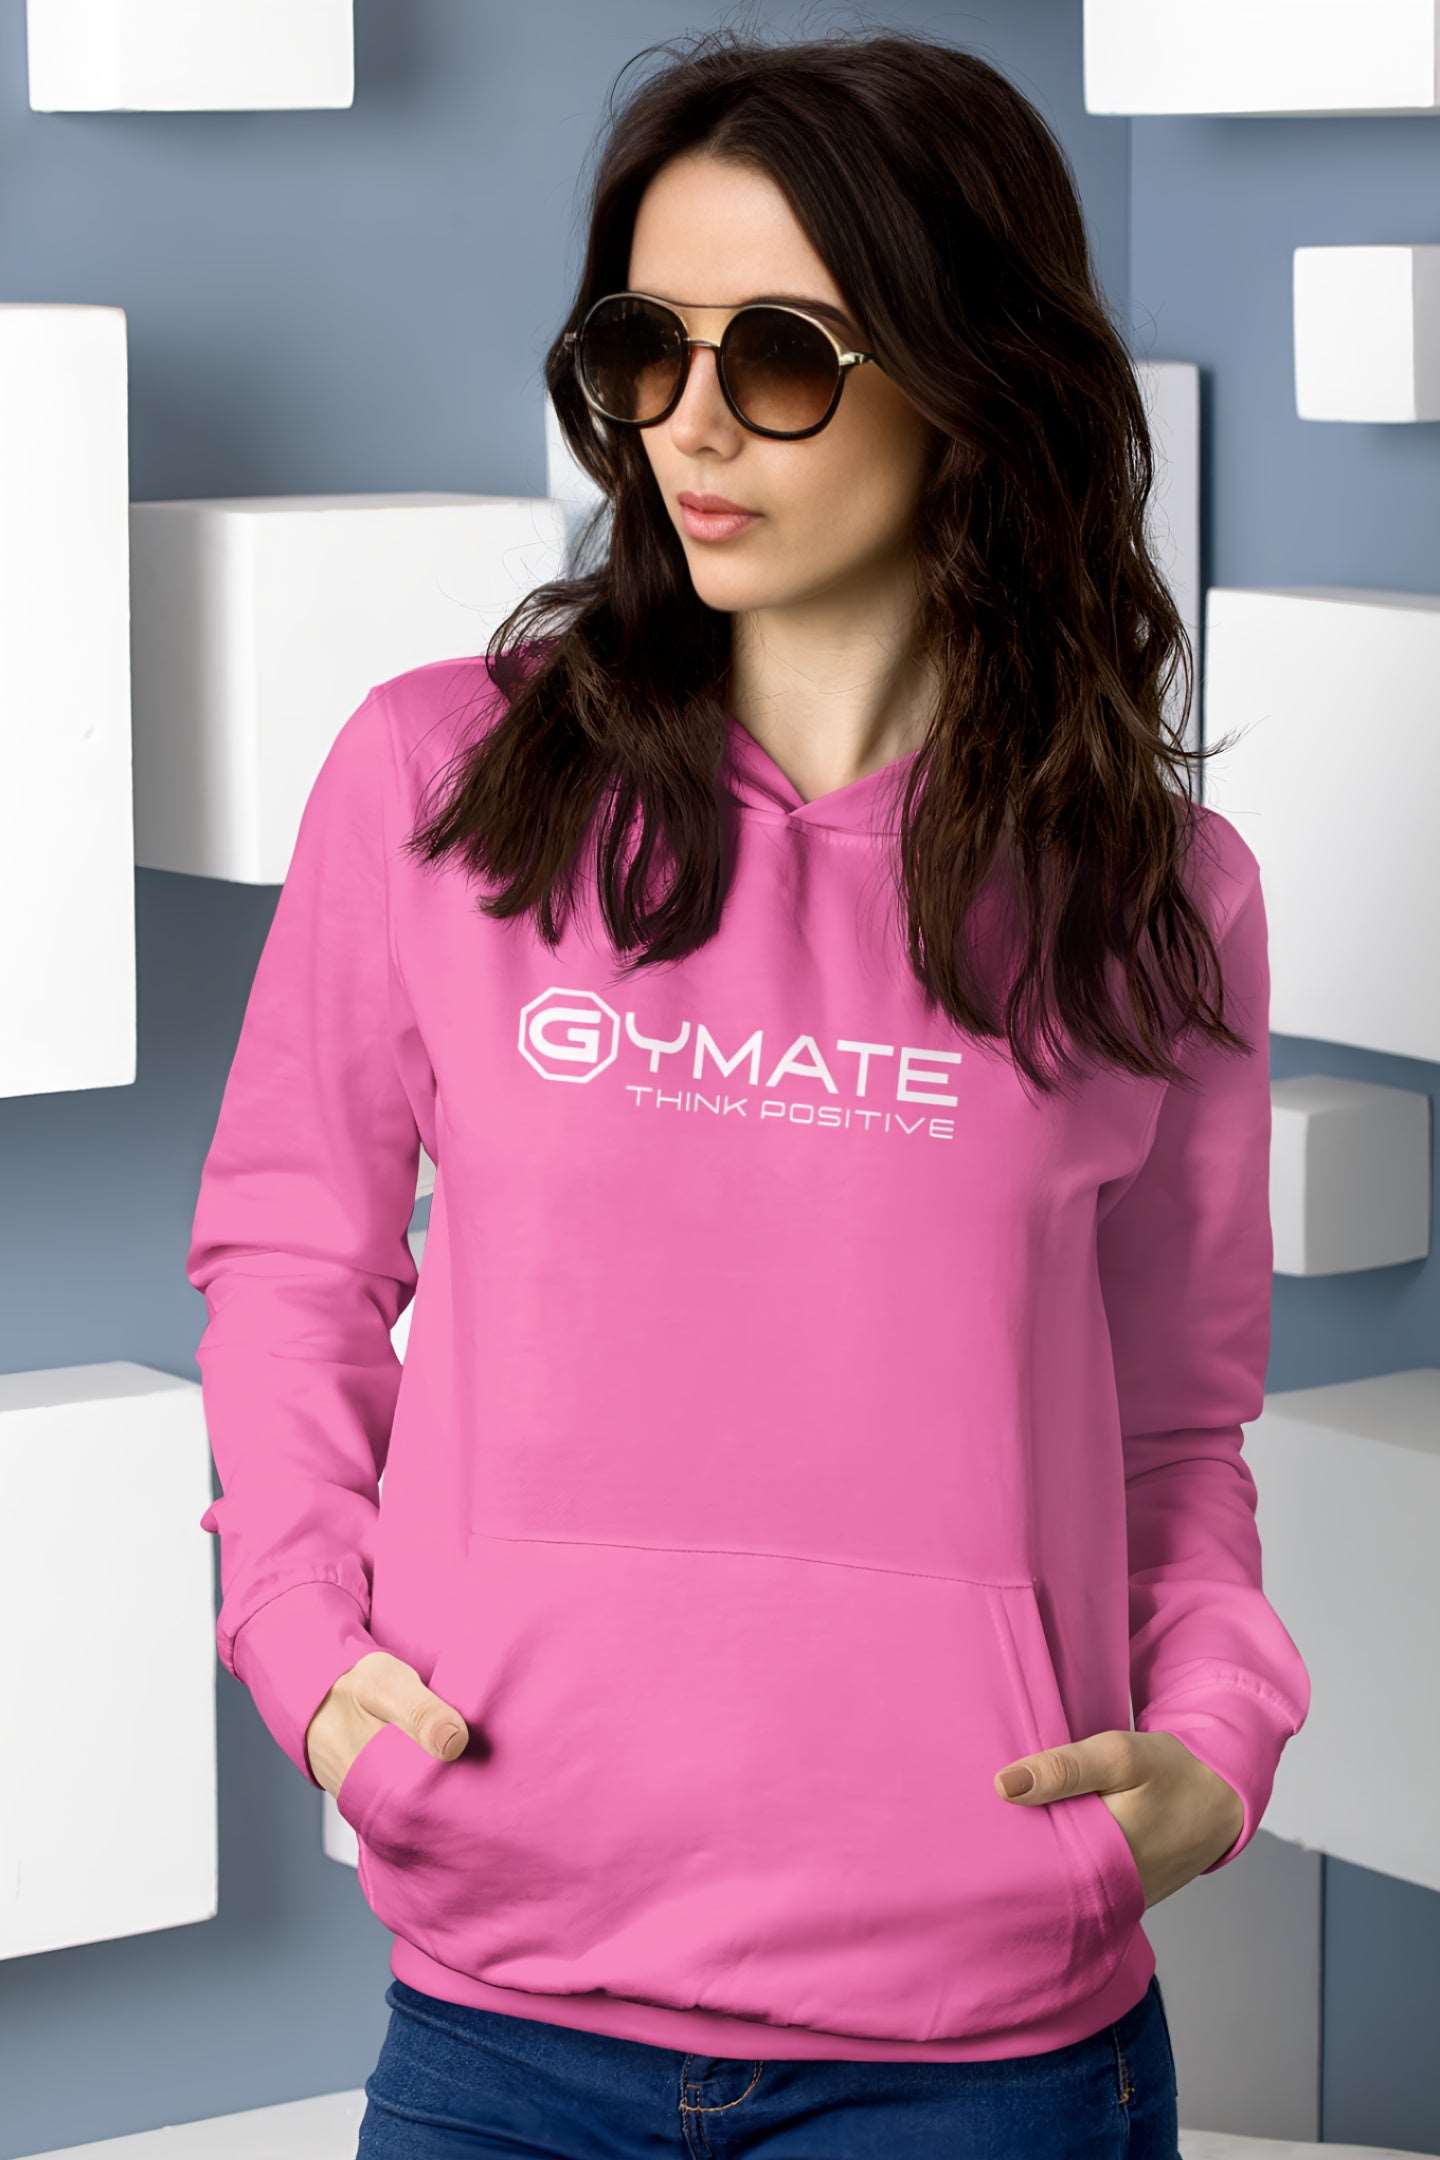 Stylish Pink Womens hoodies Athleisure Fit Gymate Branded pink